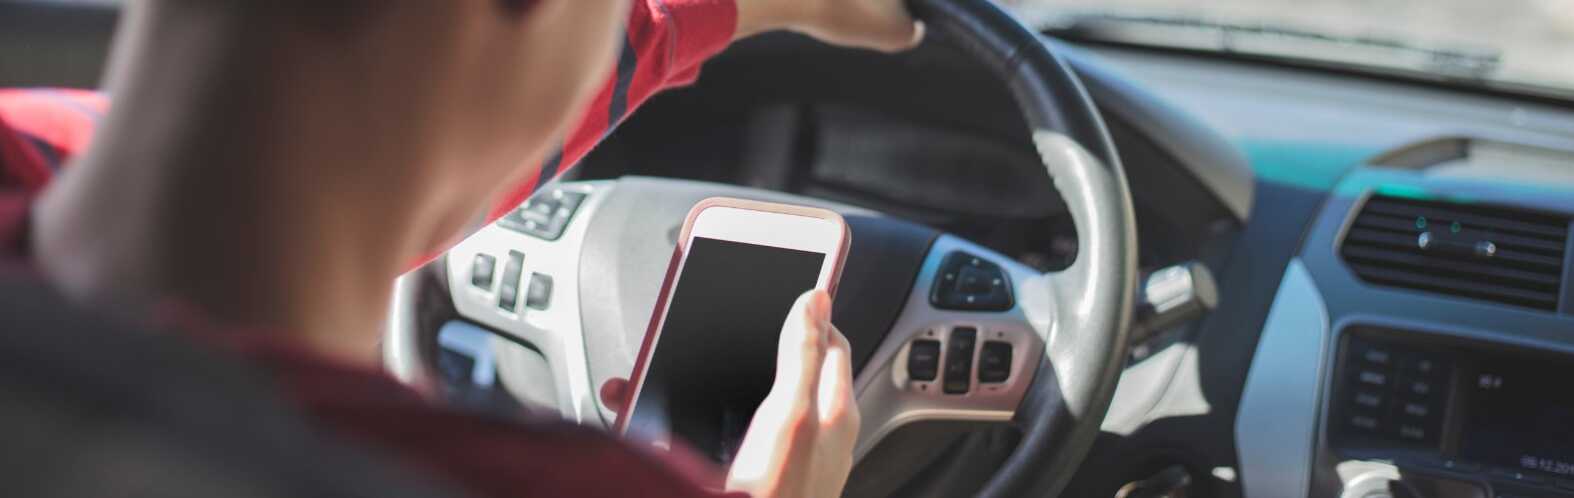 avoiding distracted driving tips